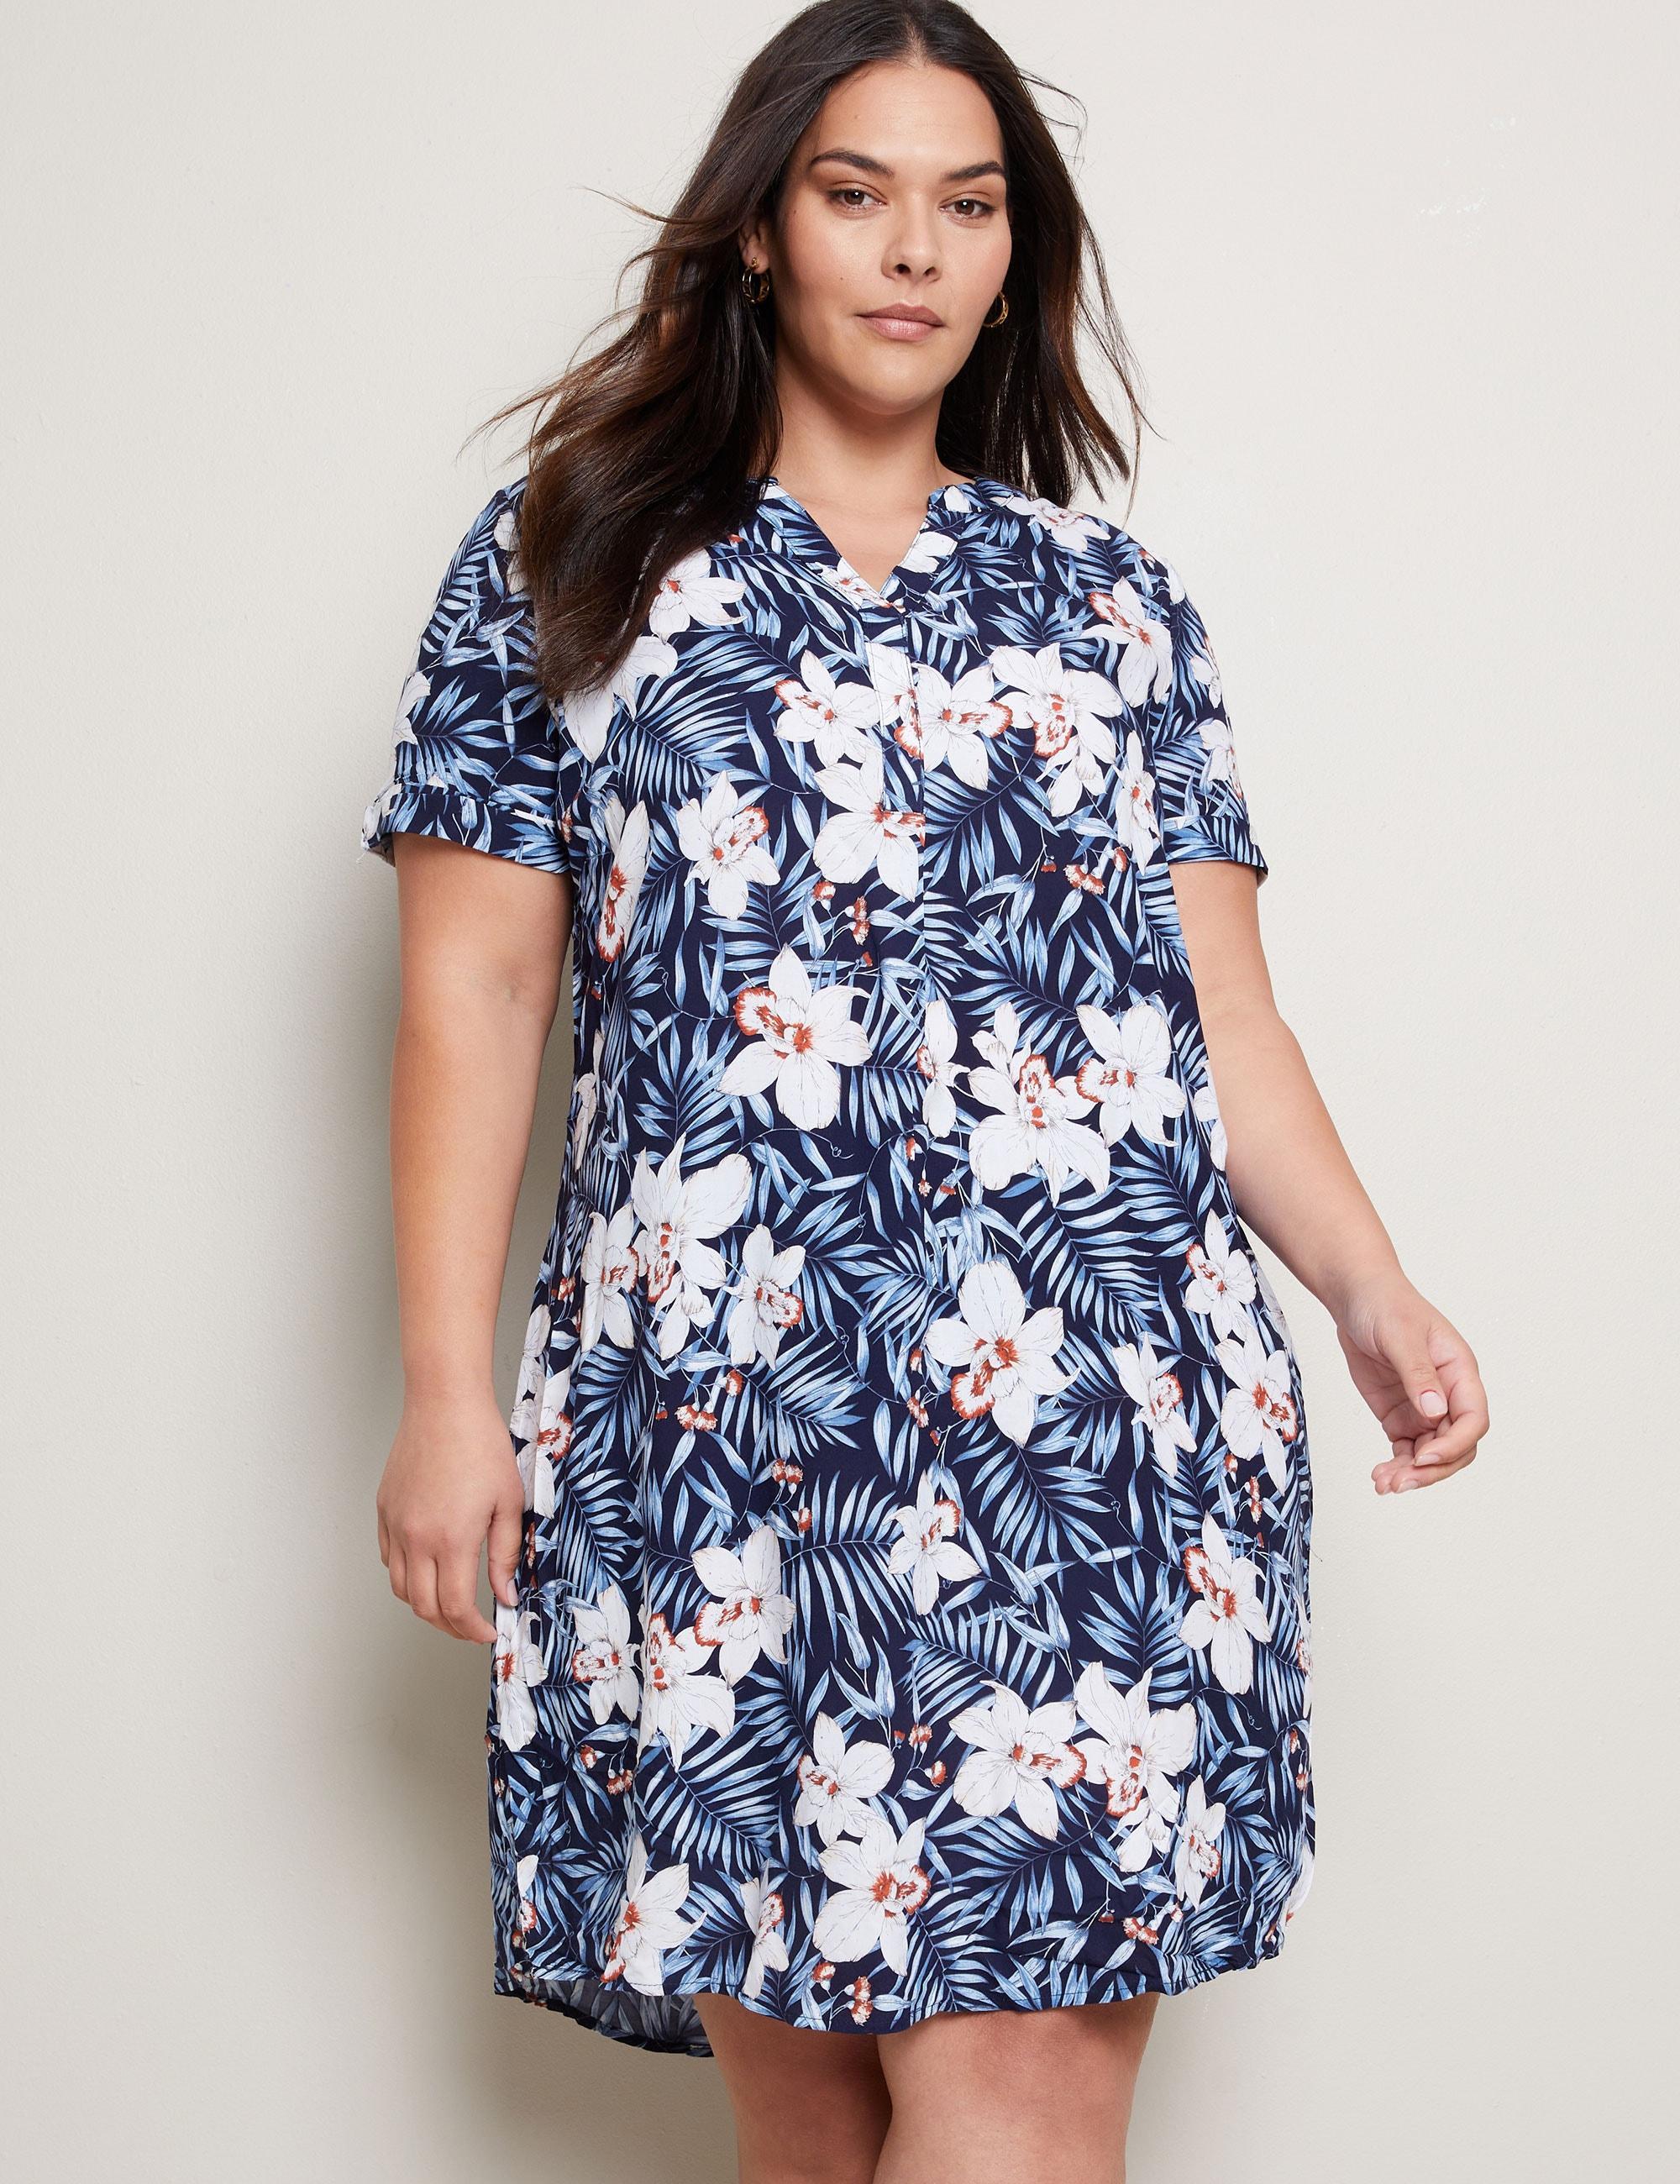 AUTOGRAPH - Plus Size - Womens Midi Dress - Blue - Summer Floral Shirt Dresses - Navy Orchid - Short Sleeve - Florals - Relaxed Fit Women's Clothing